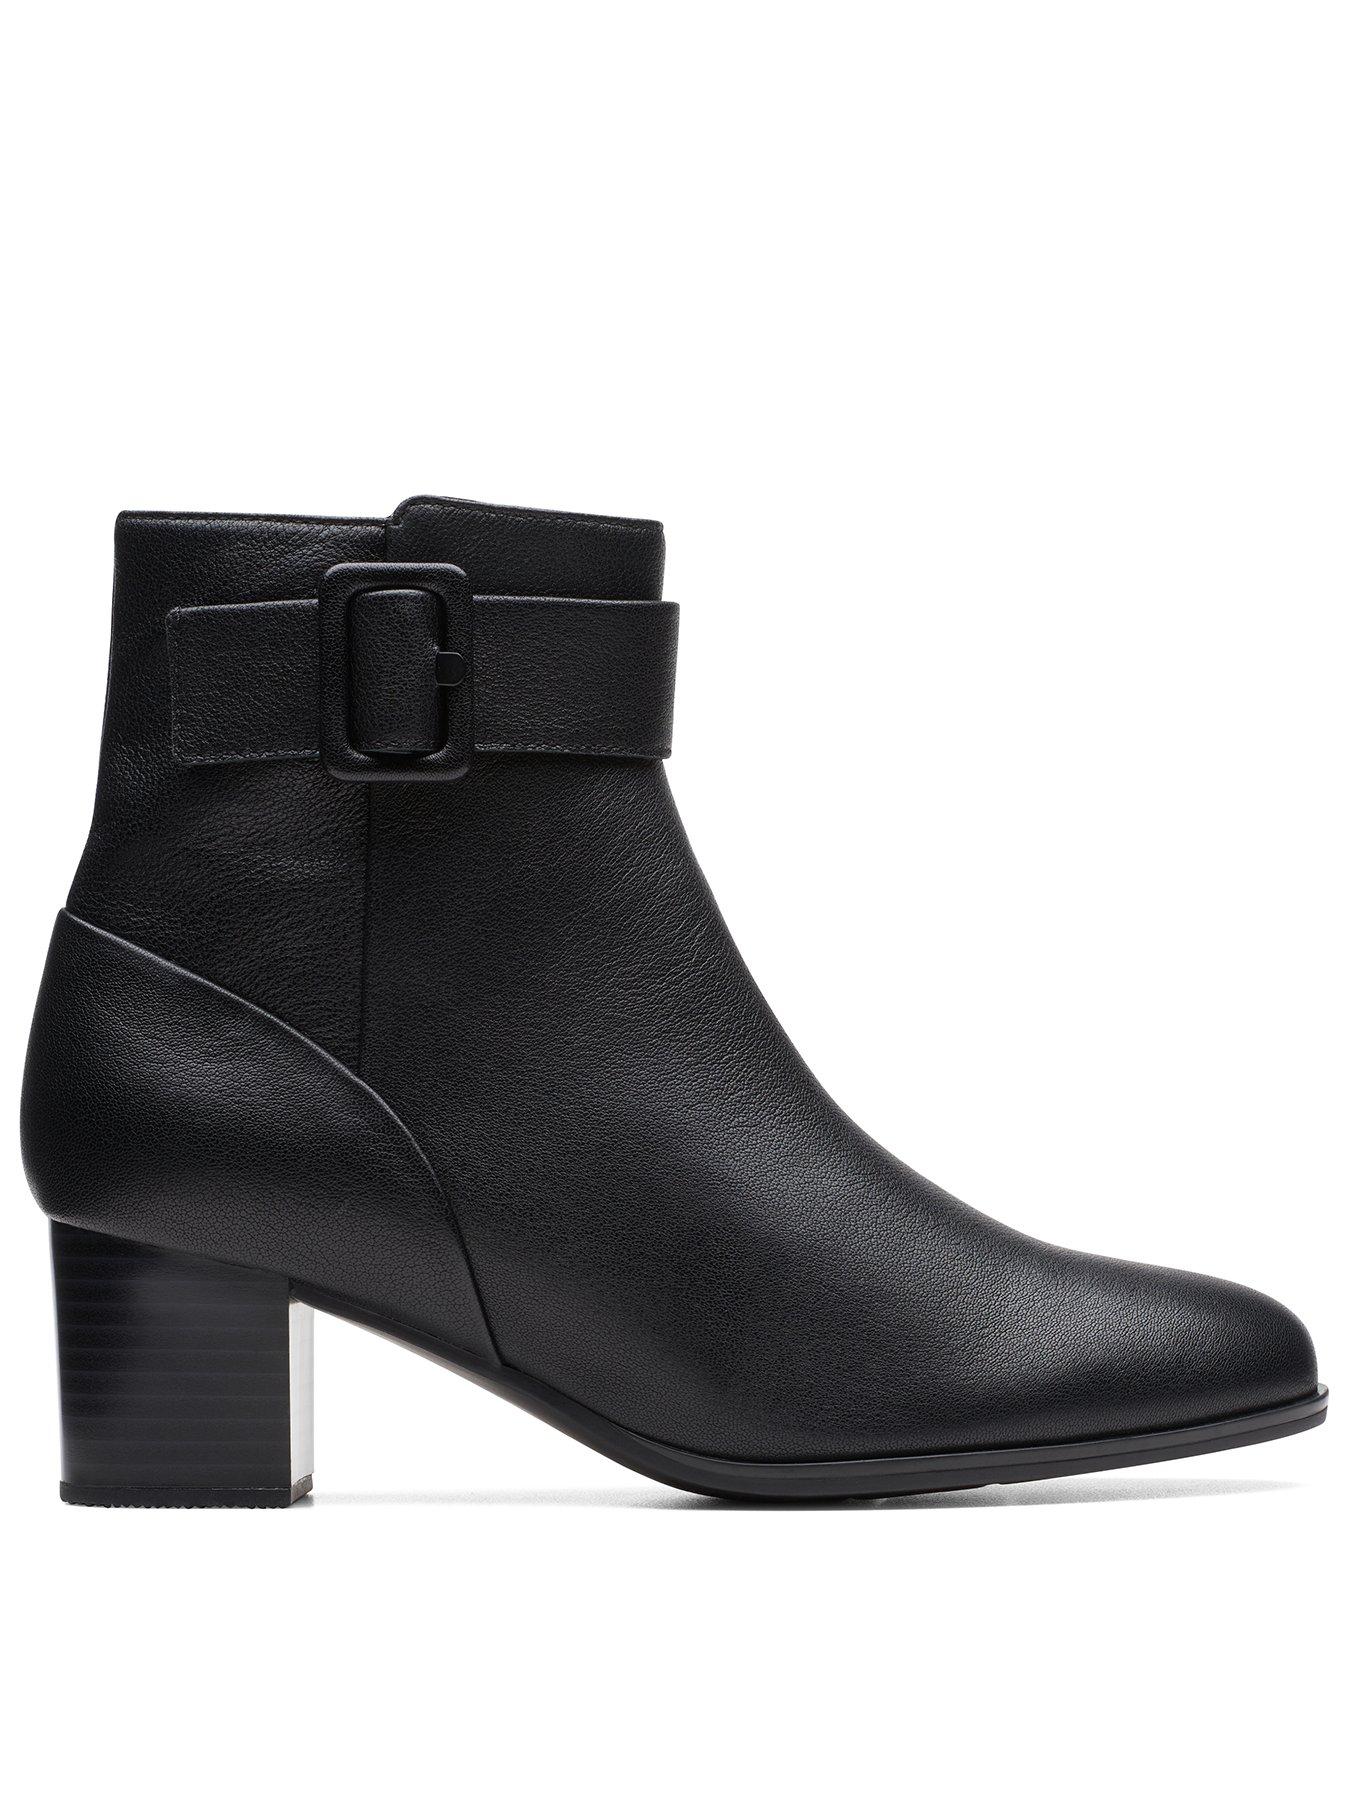 up to £1 | Clarks | Shoes & boots | Women | www.littlewoods.com